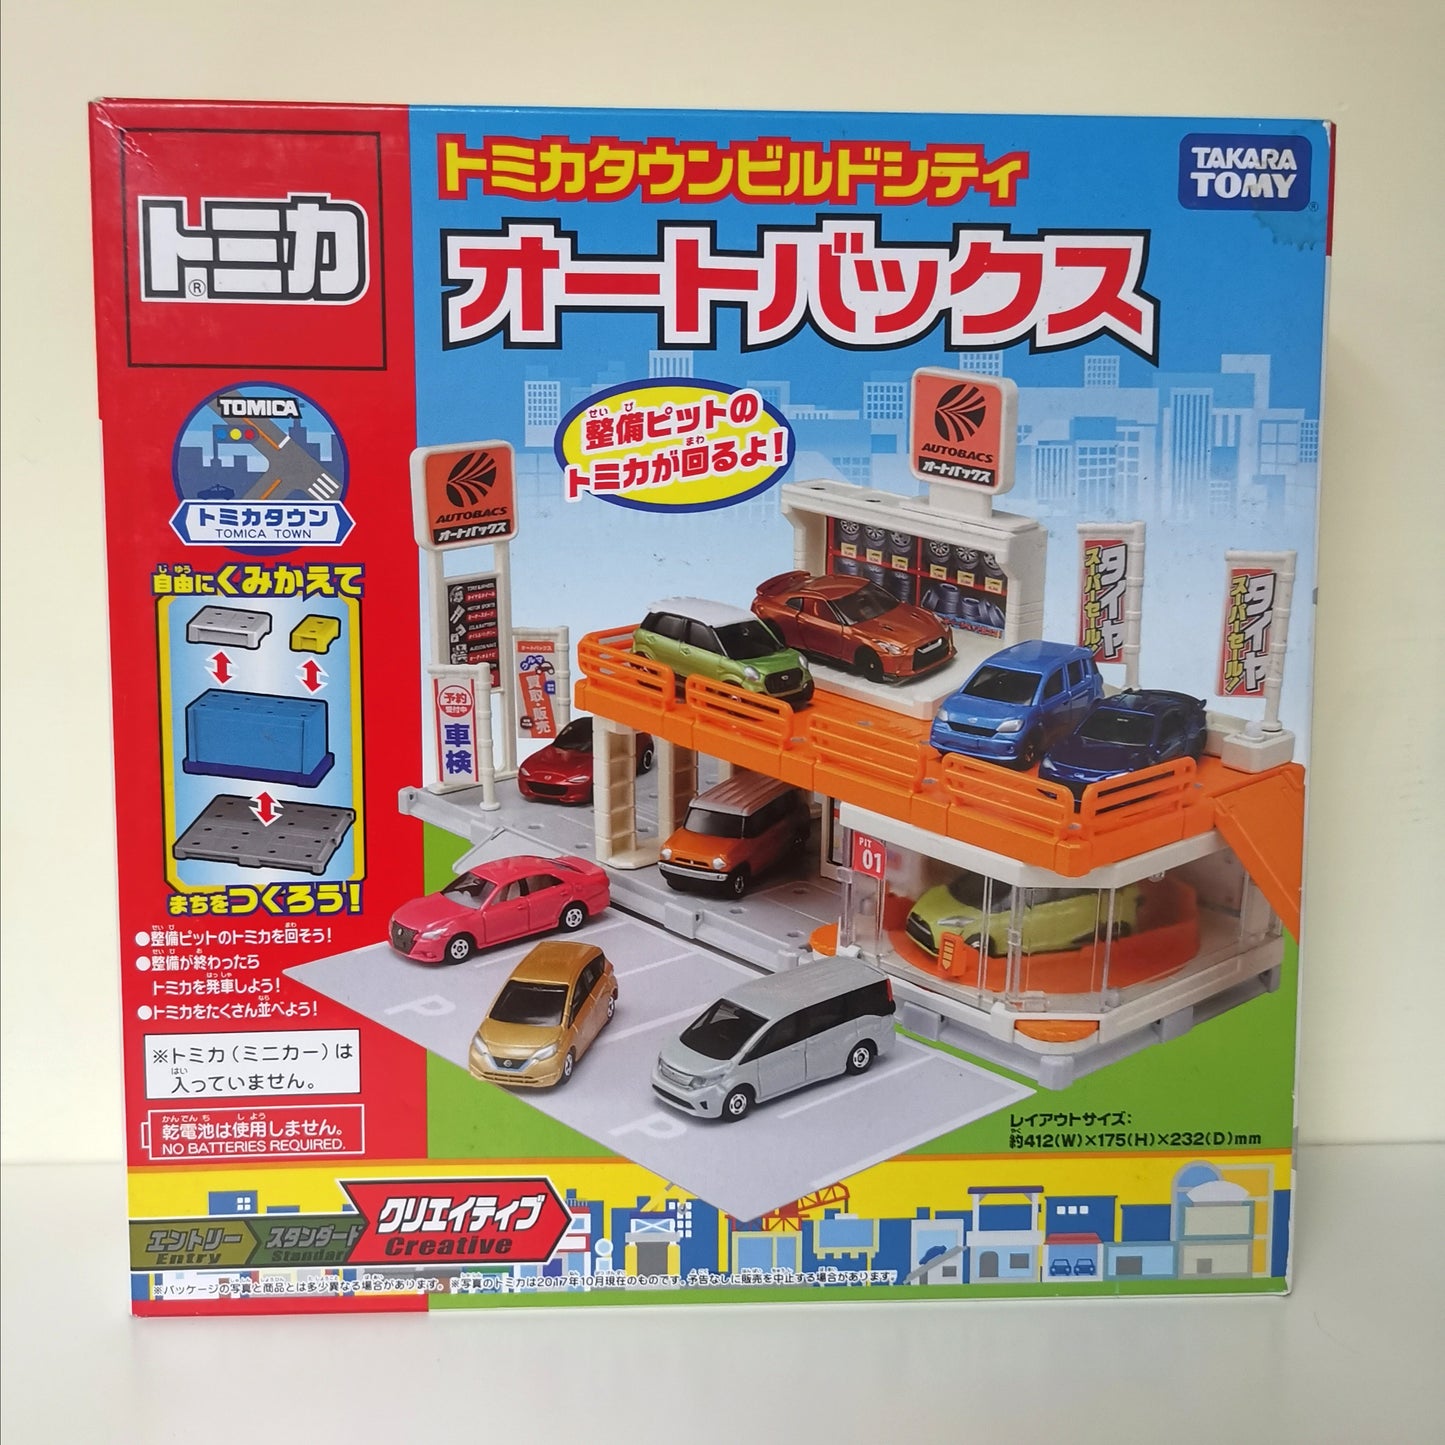 Tomica Town Japan Autobacs Autoshop Garage New in box